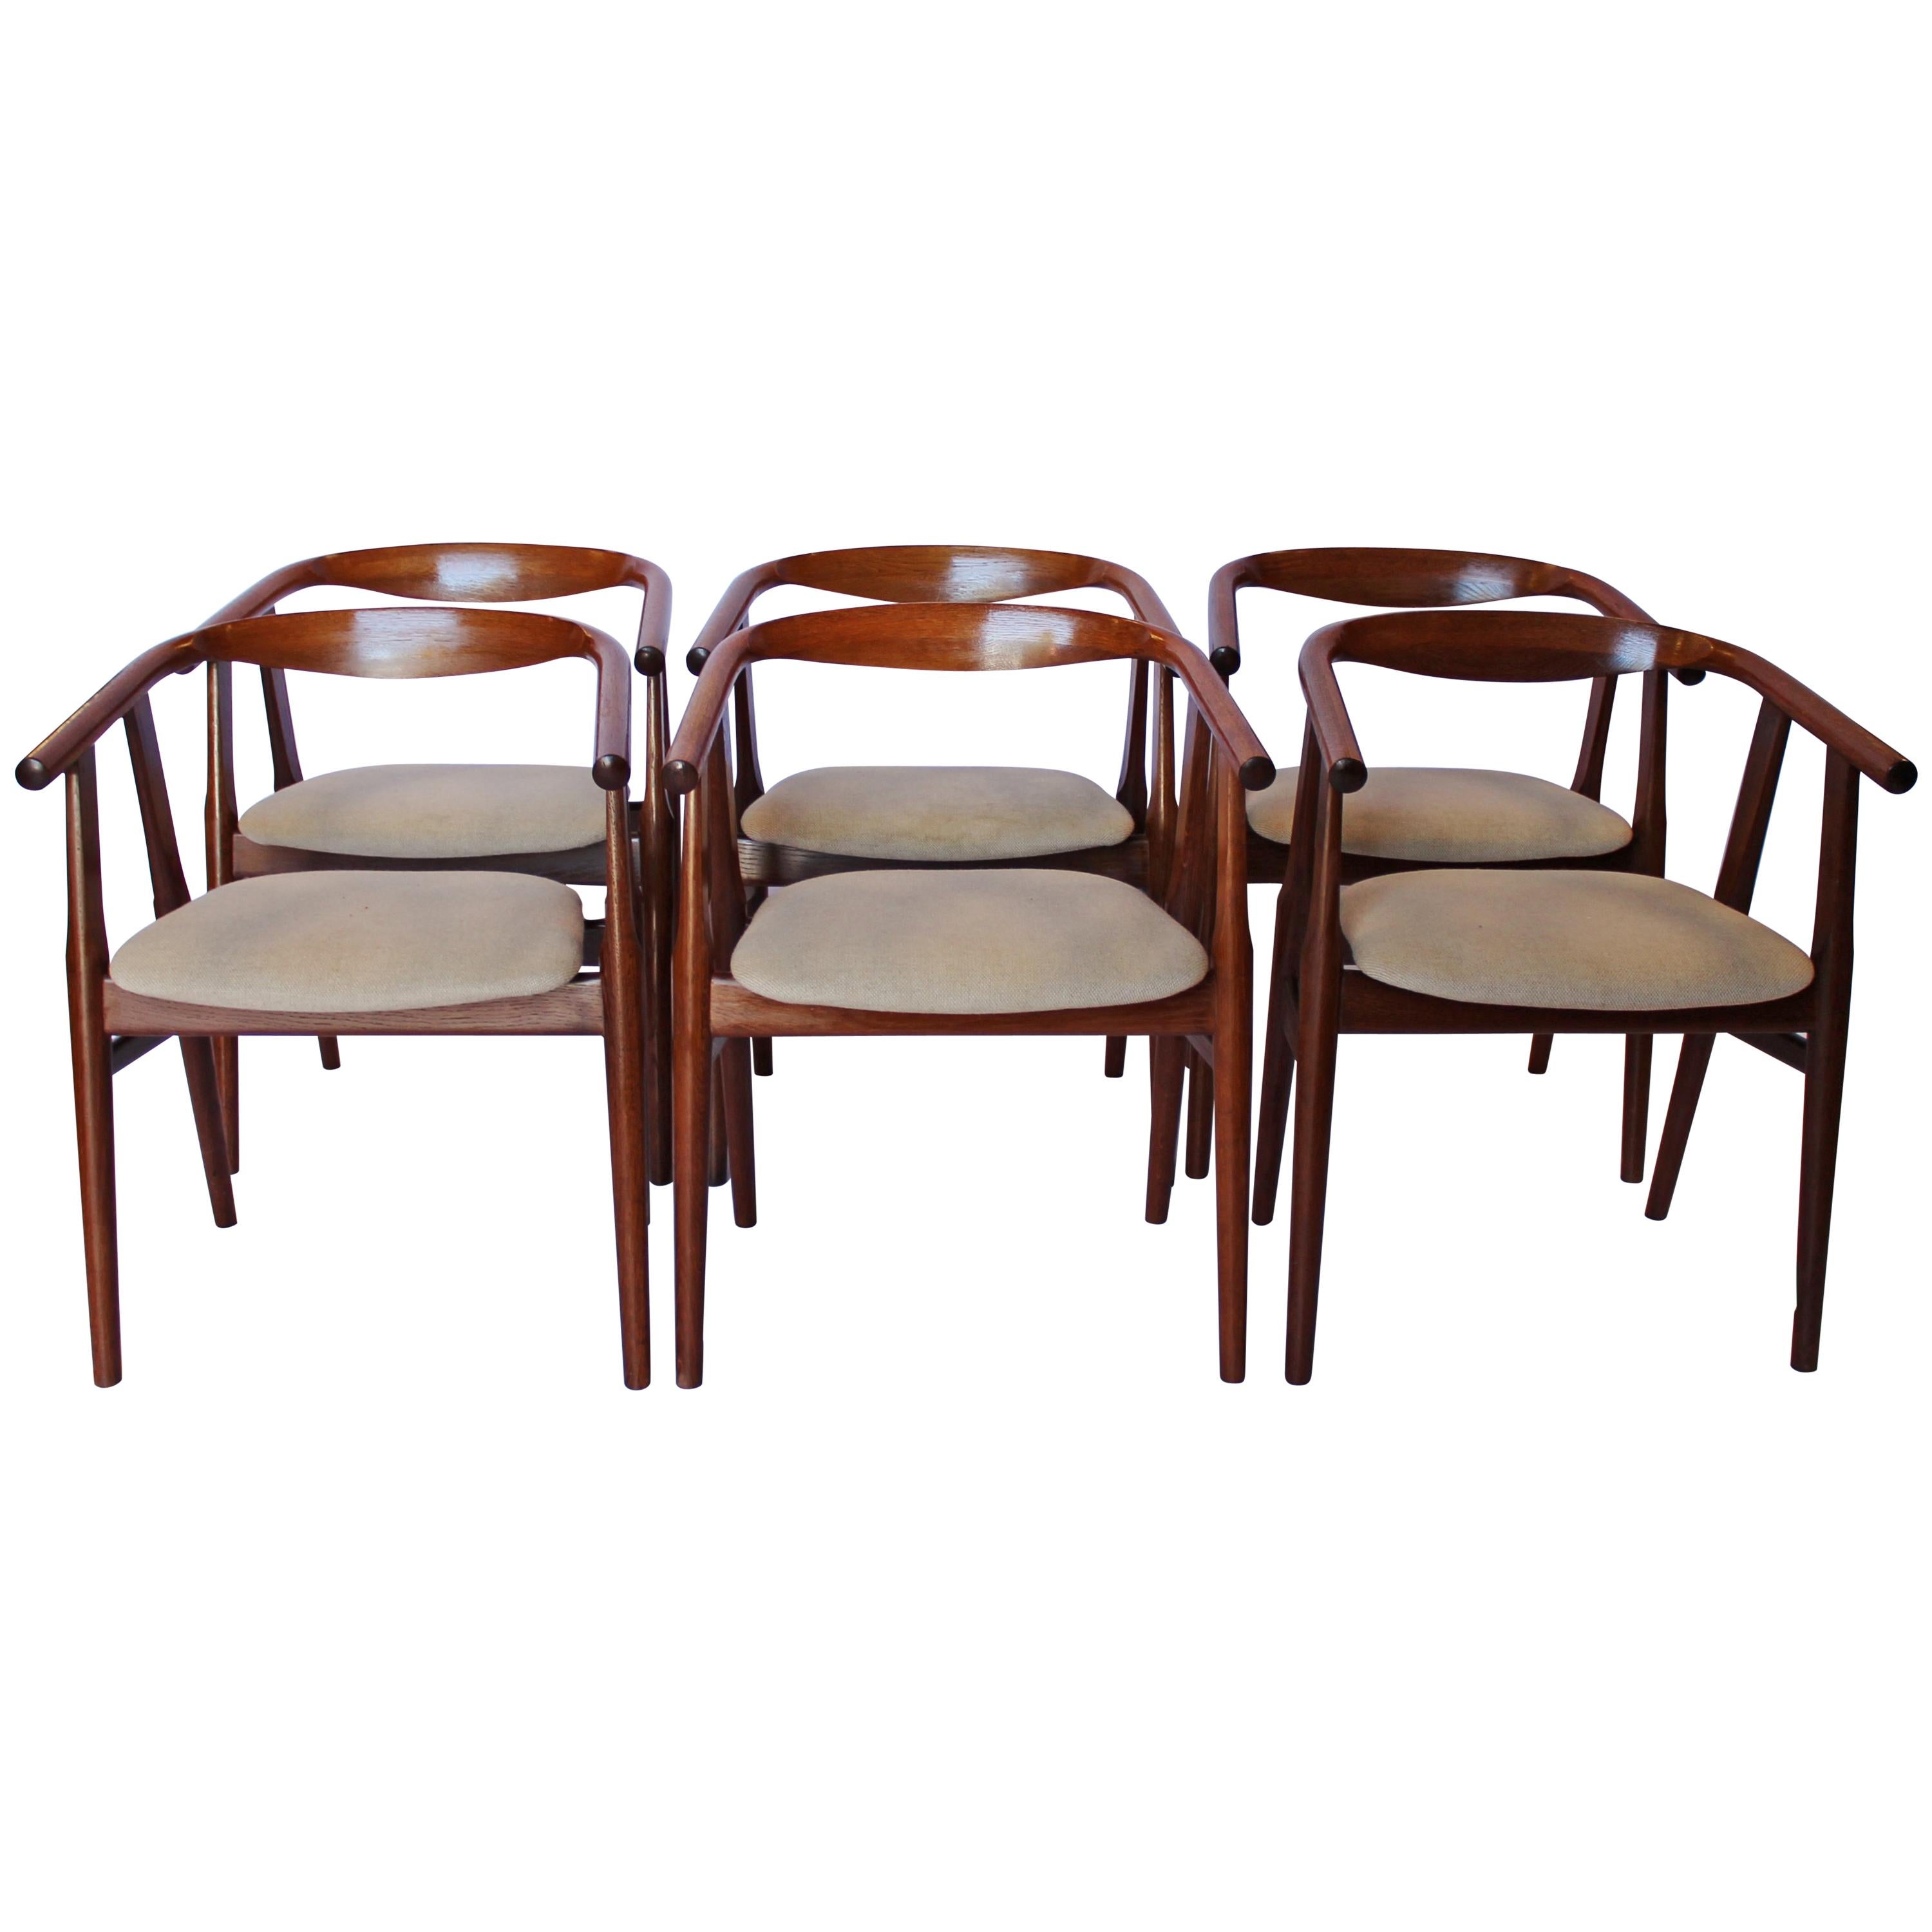 Set of Six Dining Room Chairs, model GE525  by Hans J. Wegner and GETAMA, 1960s